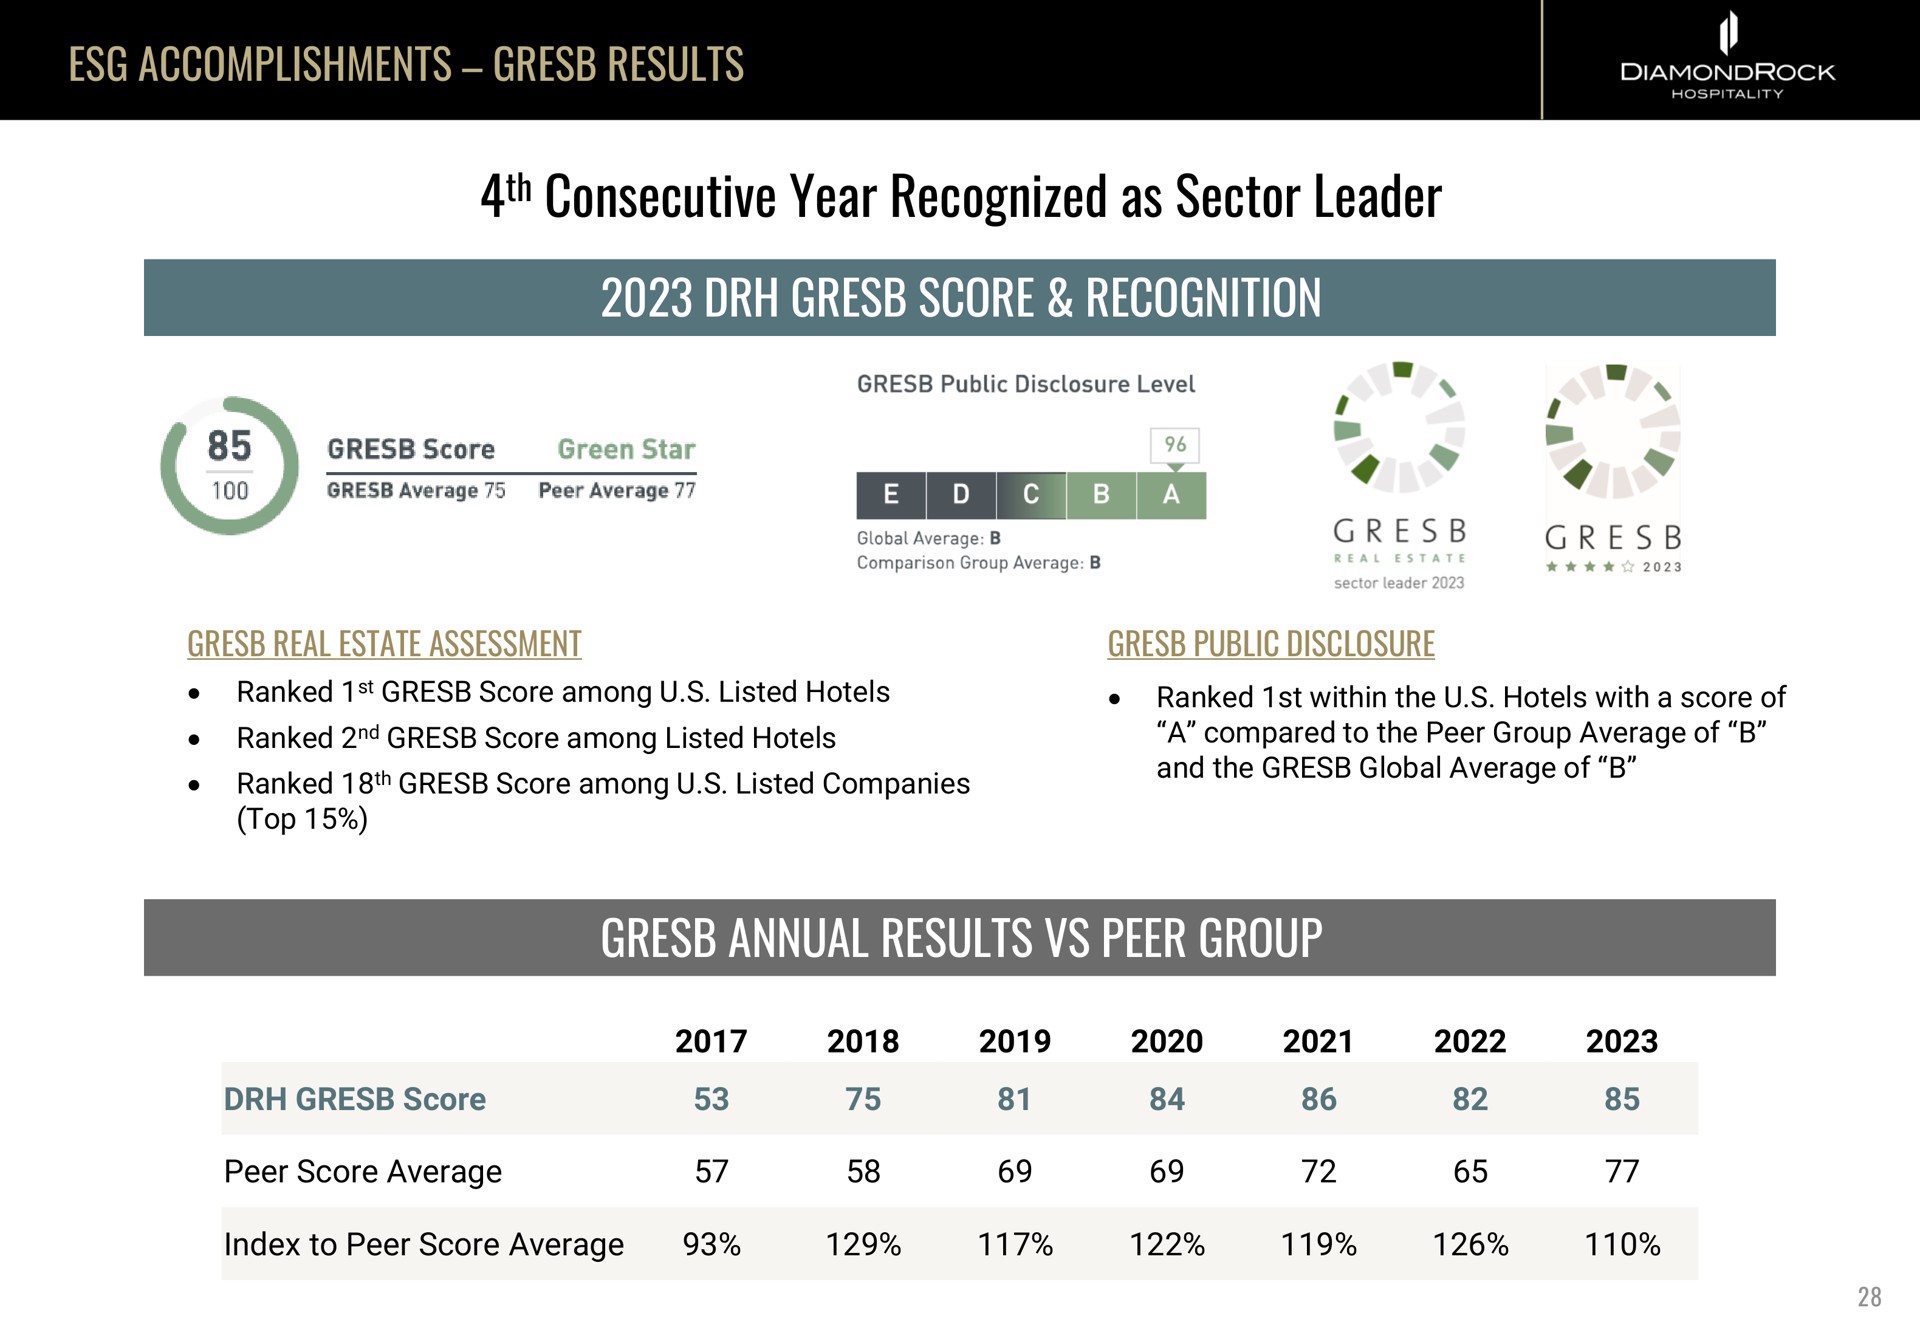 accomplishments results consecutive year recognized as sector leader score recognition annual results peer group arn a chun toe no lee | DiamondRock Hospitality